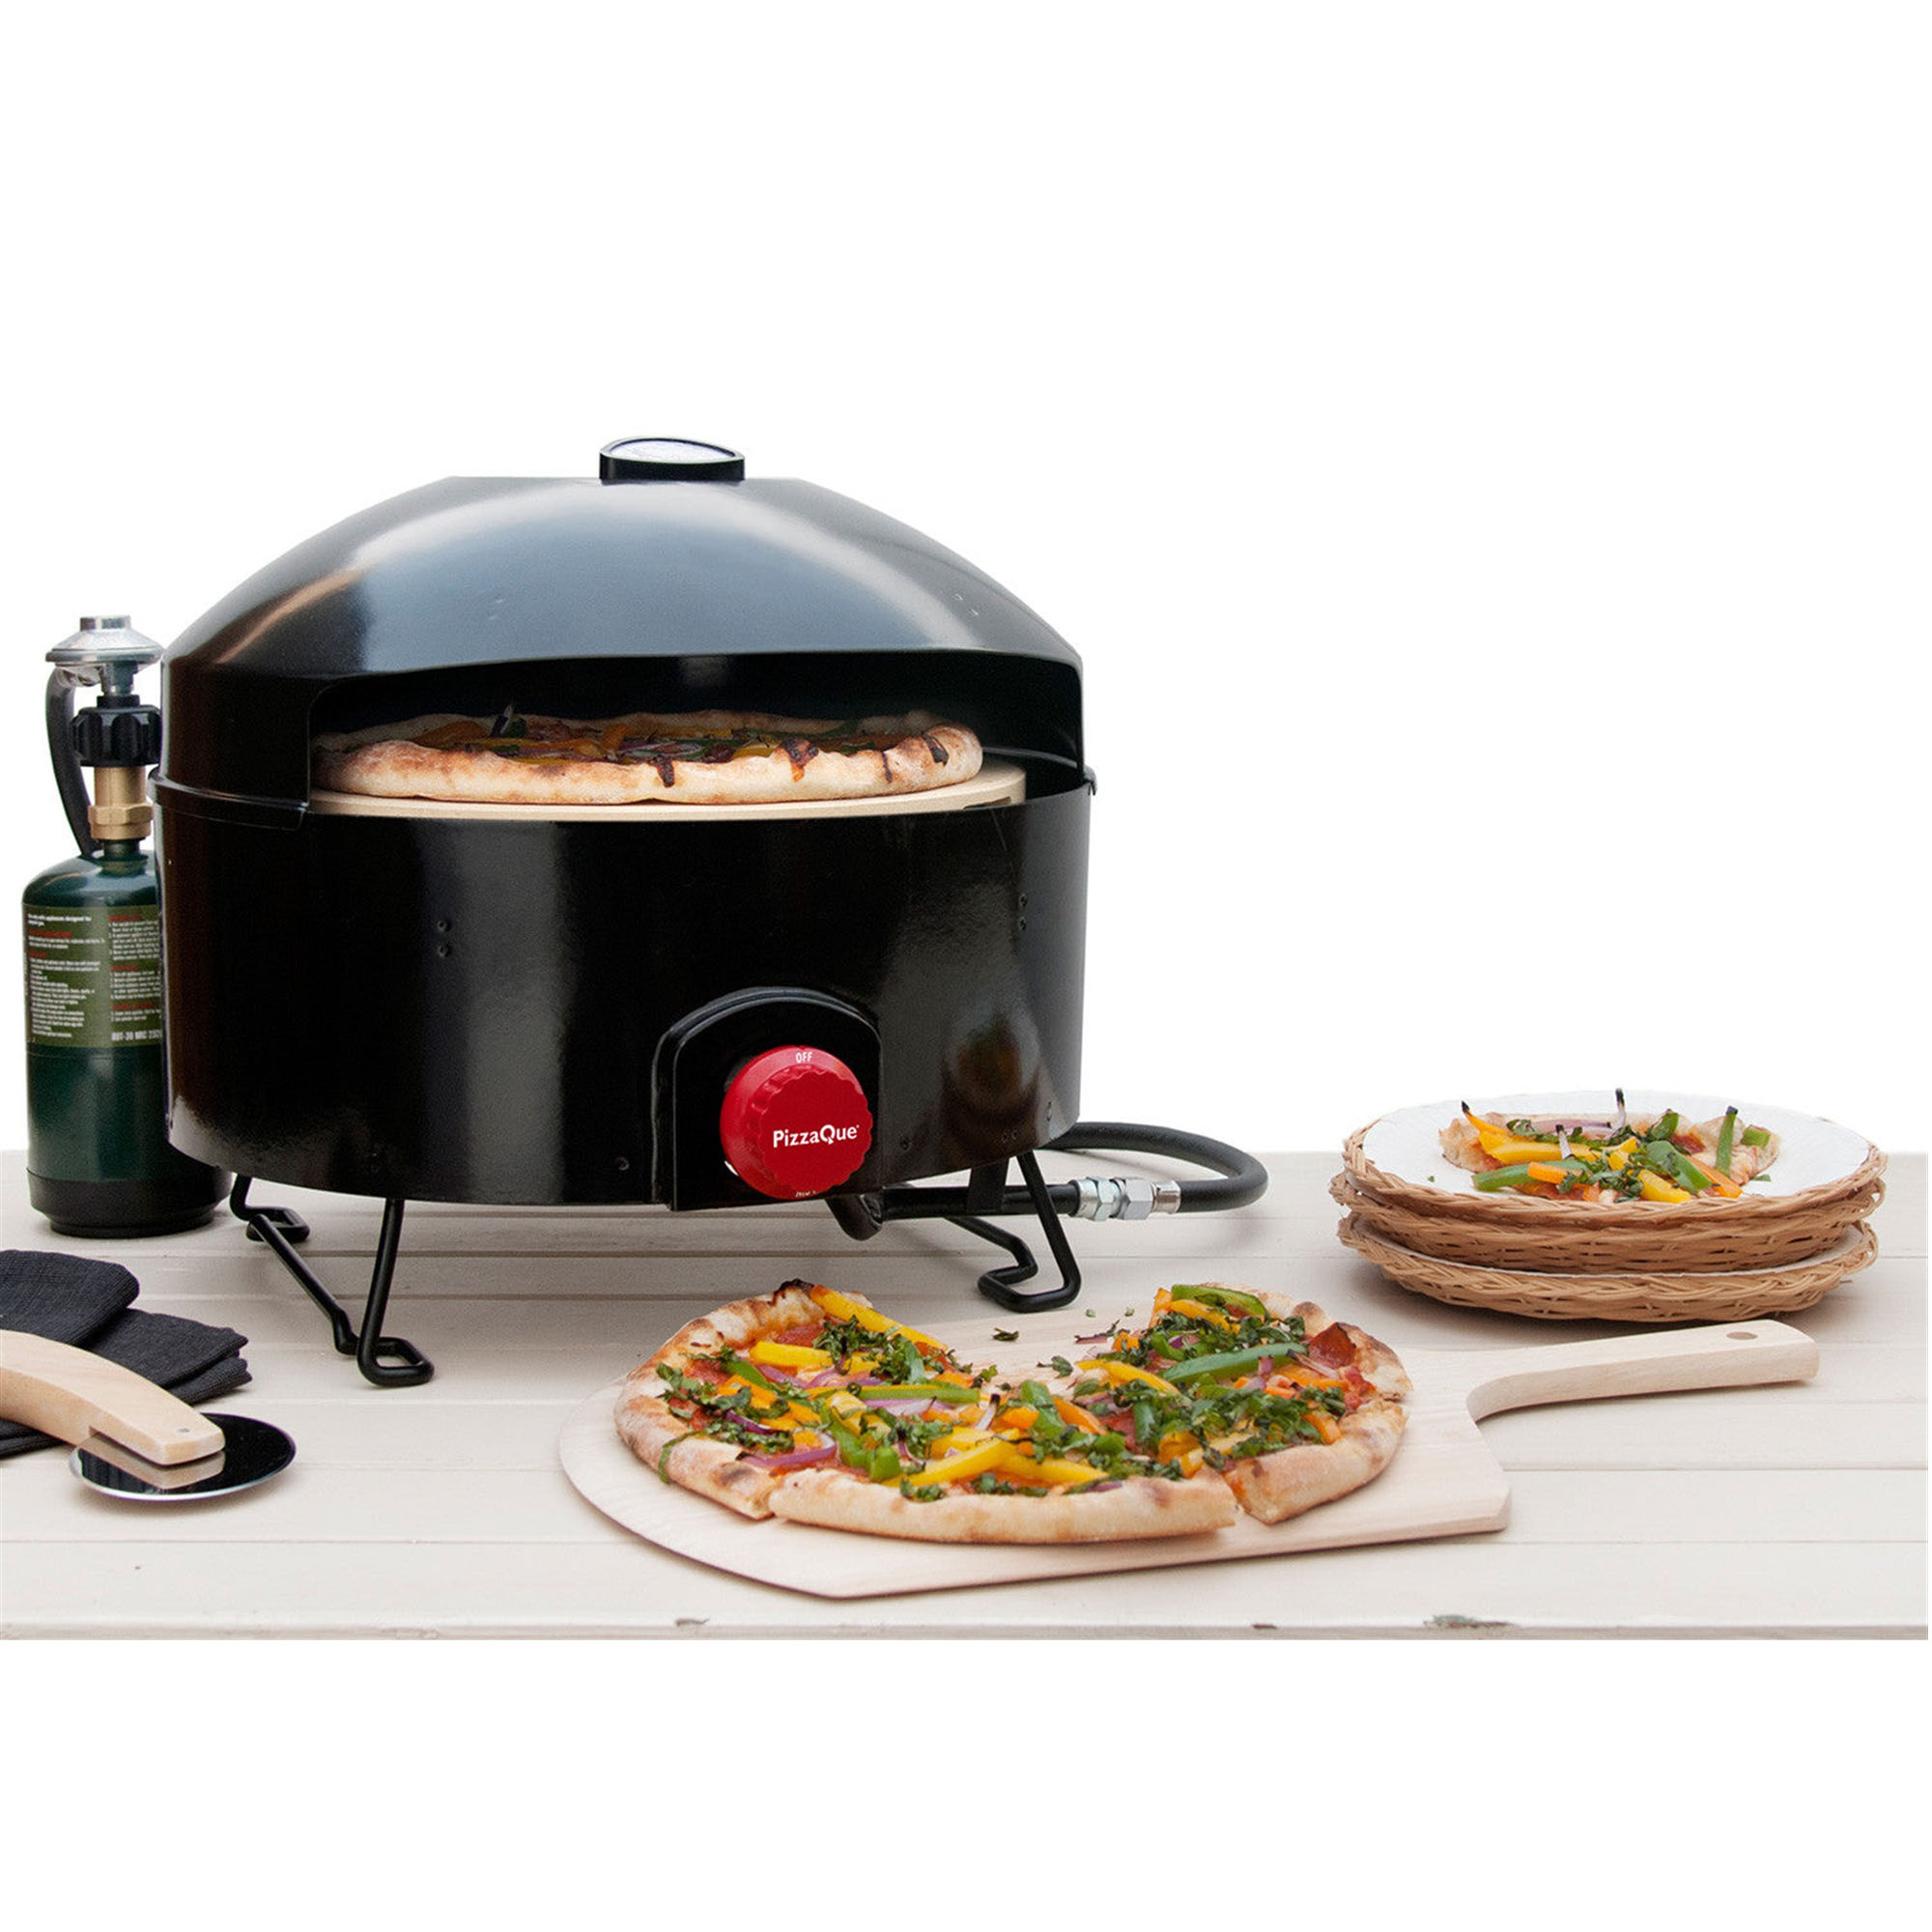 Pizzacraft PC6500 PizzaQue Portable Outdoor Pizza Oven - image 3 of 9